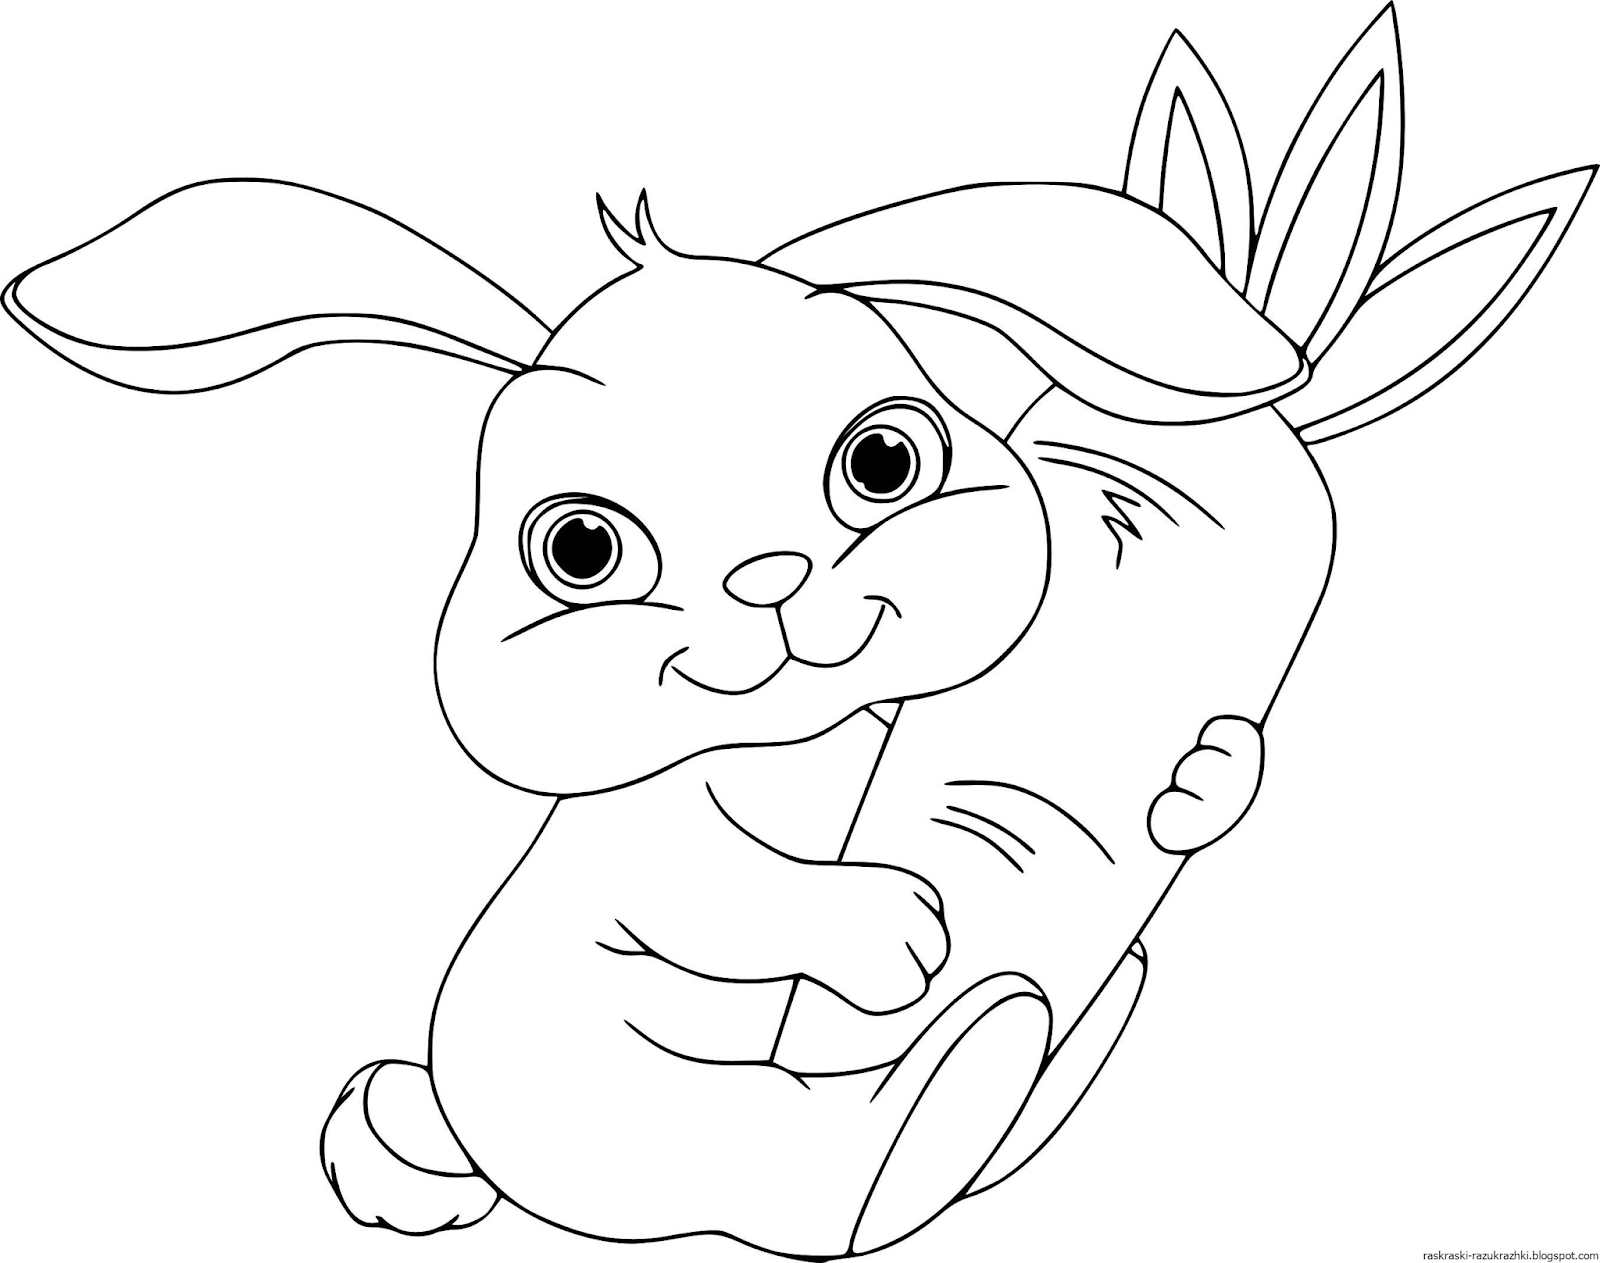 Glitter rabbit and cat coloring page